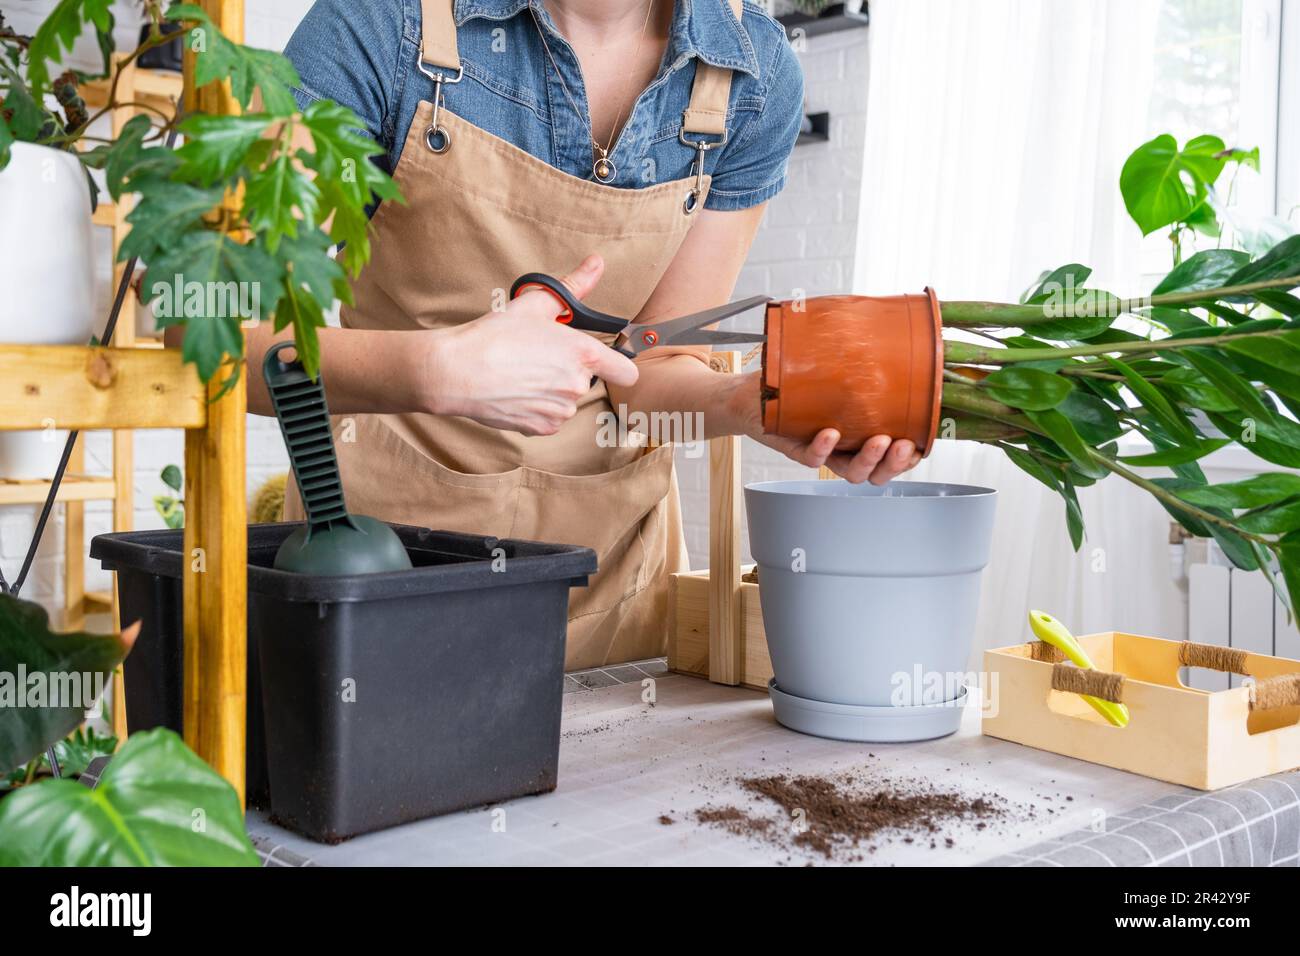 Repotting overgrown home plant succulent Zamioculcas into new bigger pot. Caring for potted plant, hands of woman cuts a small pot with scissors in ap Stock Photo